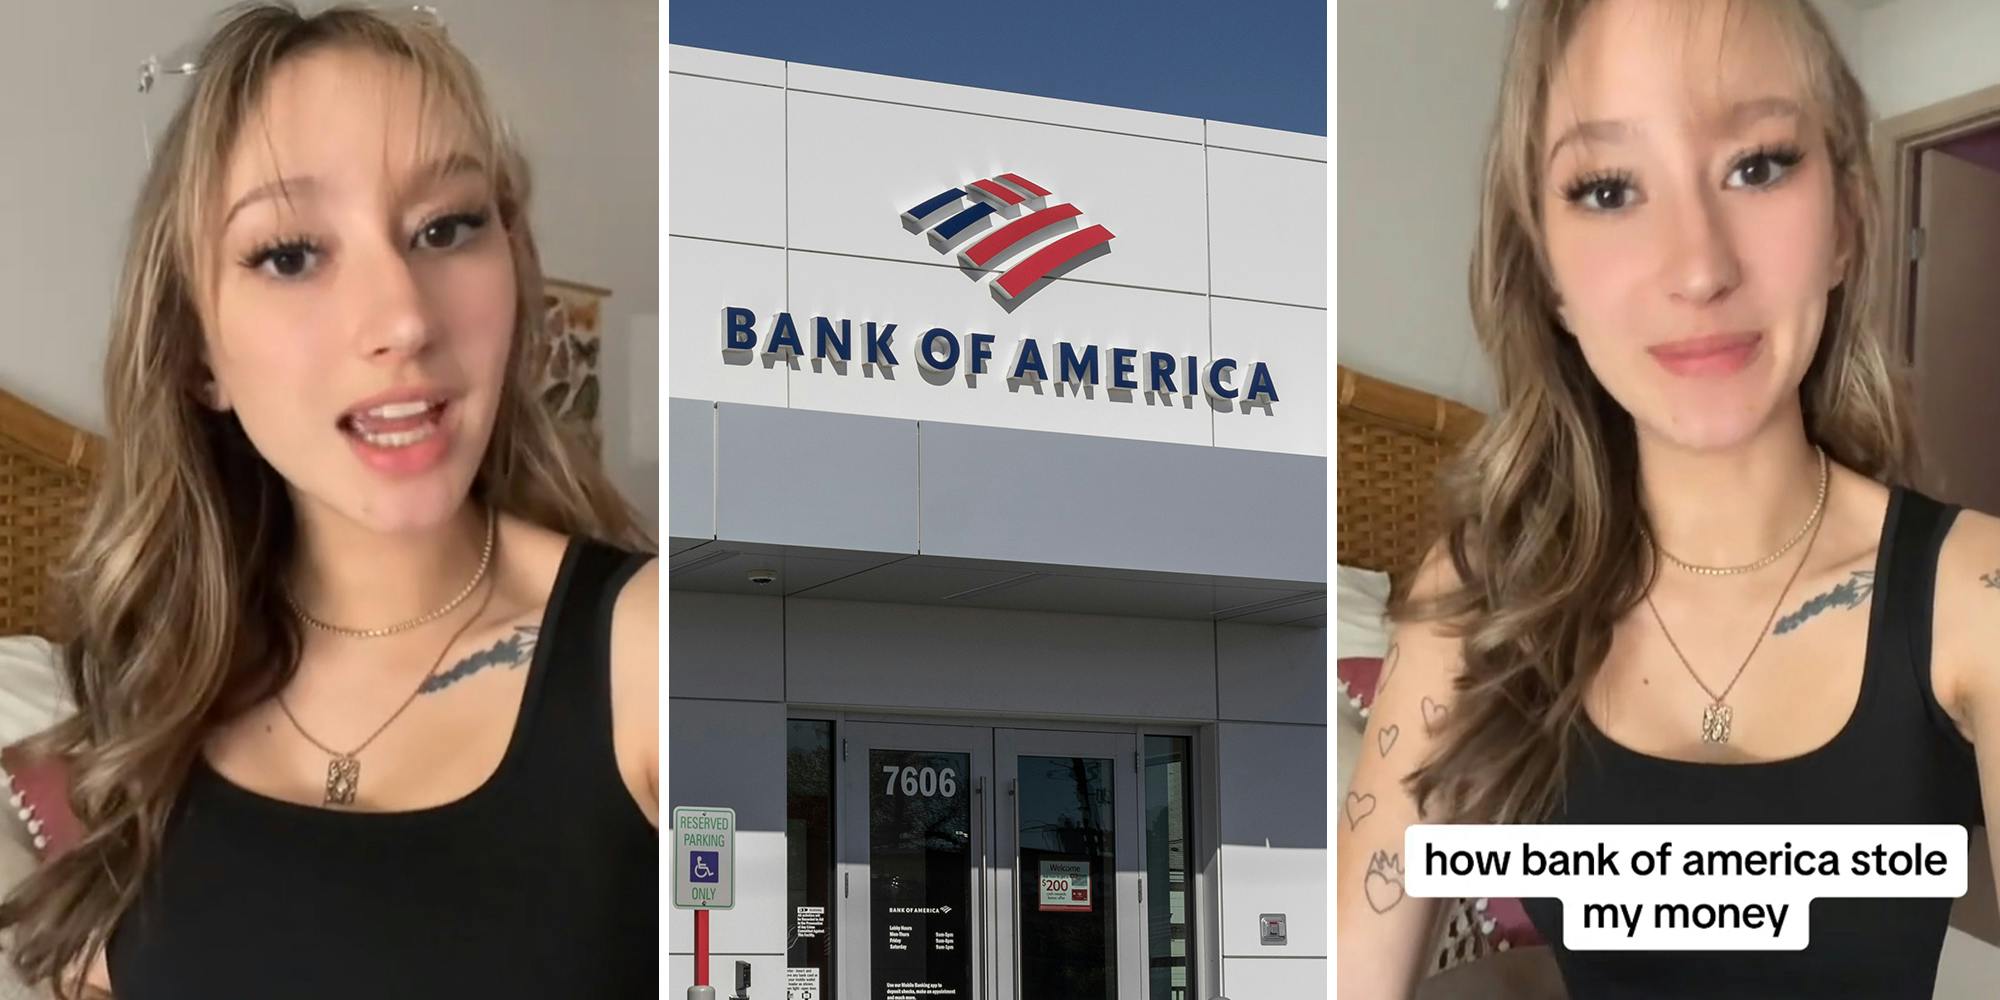 ‘The screen goes black’: Woman warns against Bank of America ATM after her $1,000 disappeared when she tried to deposit it